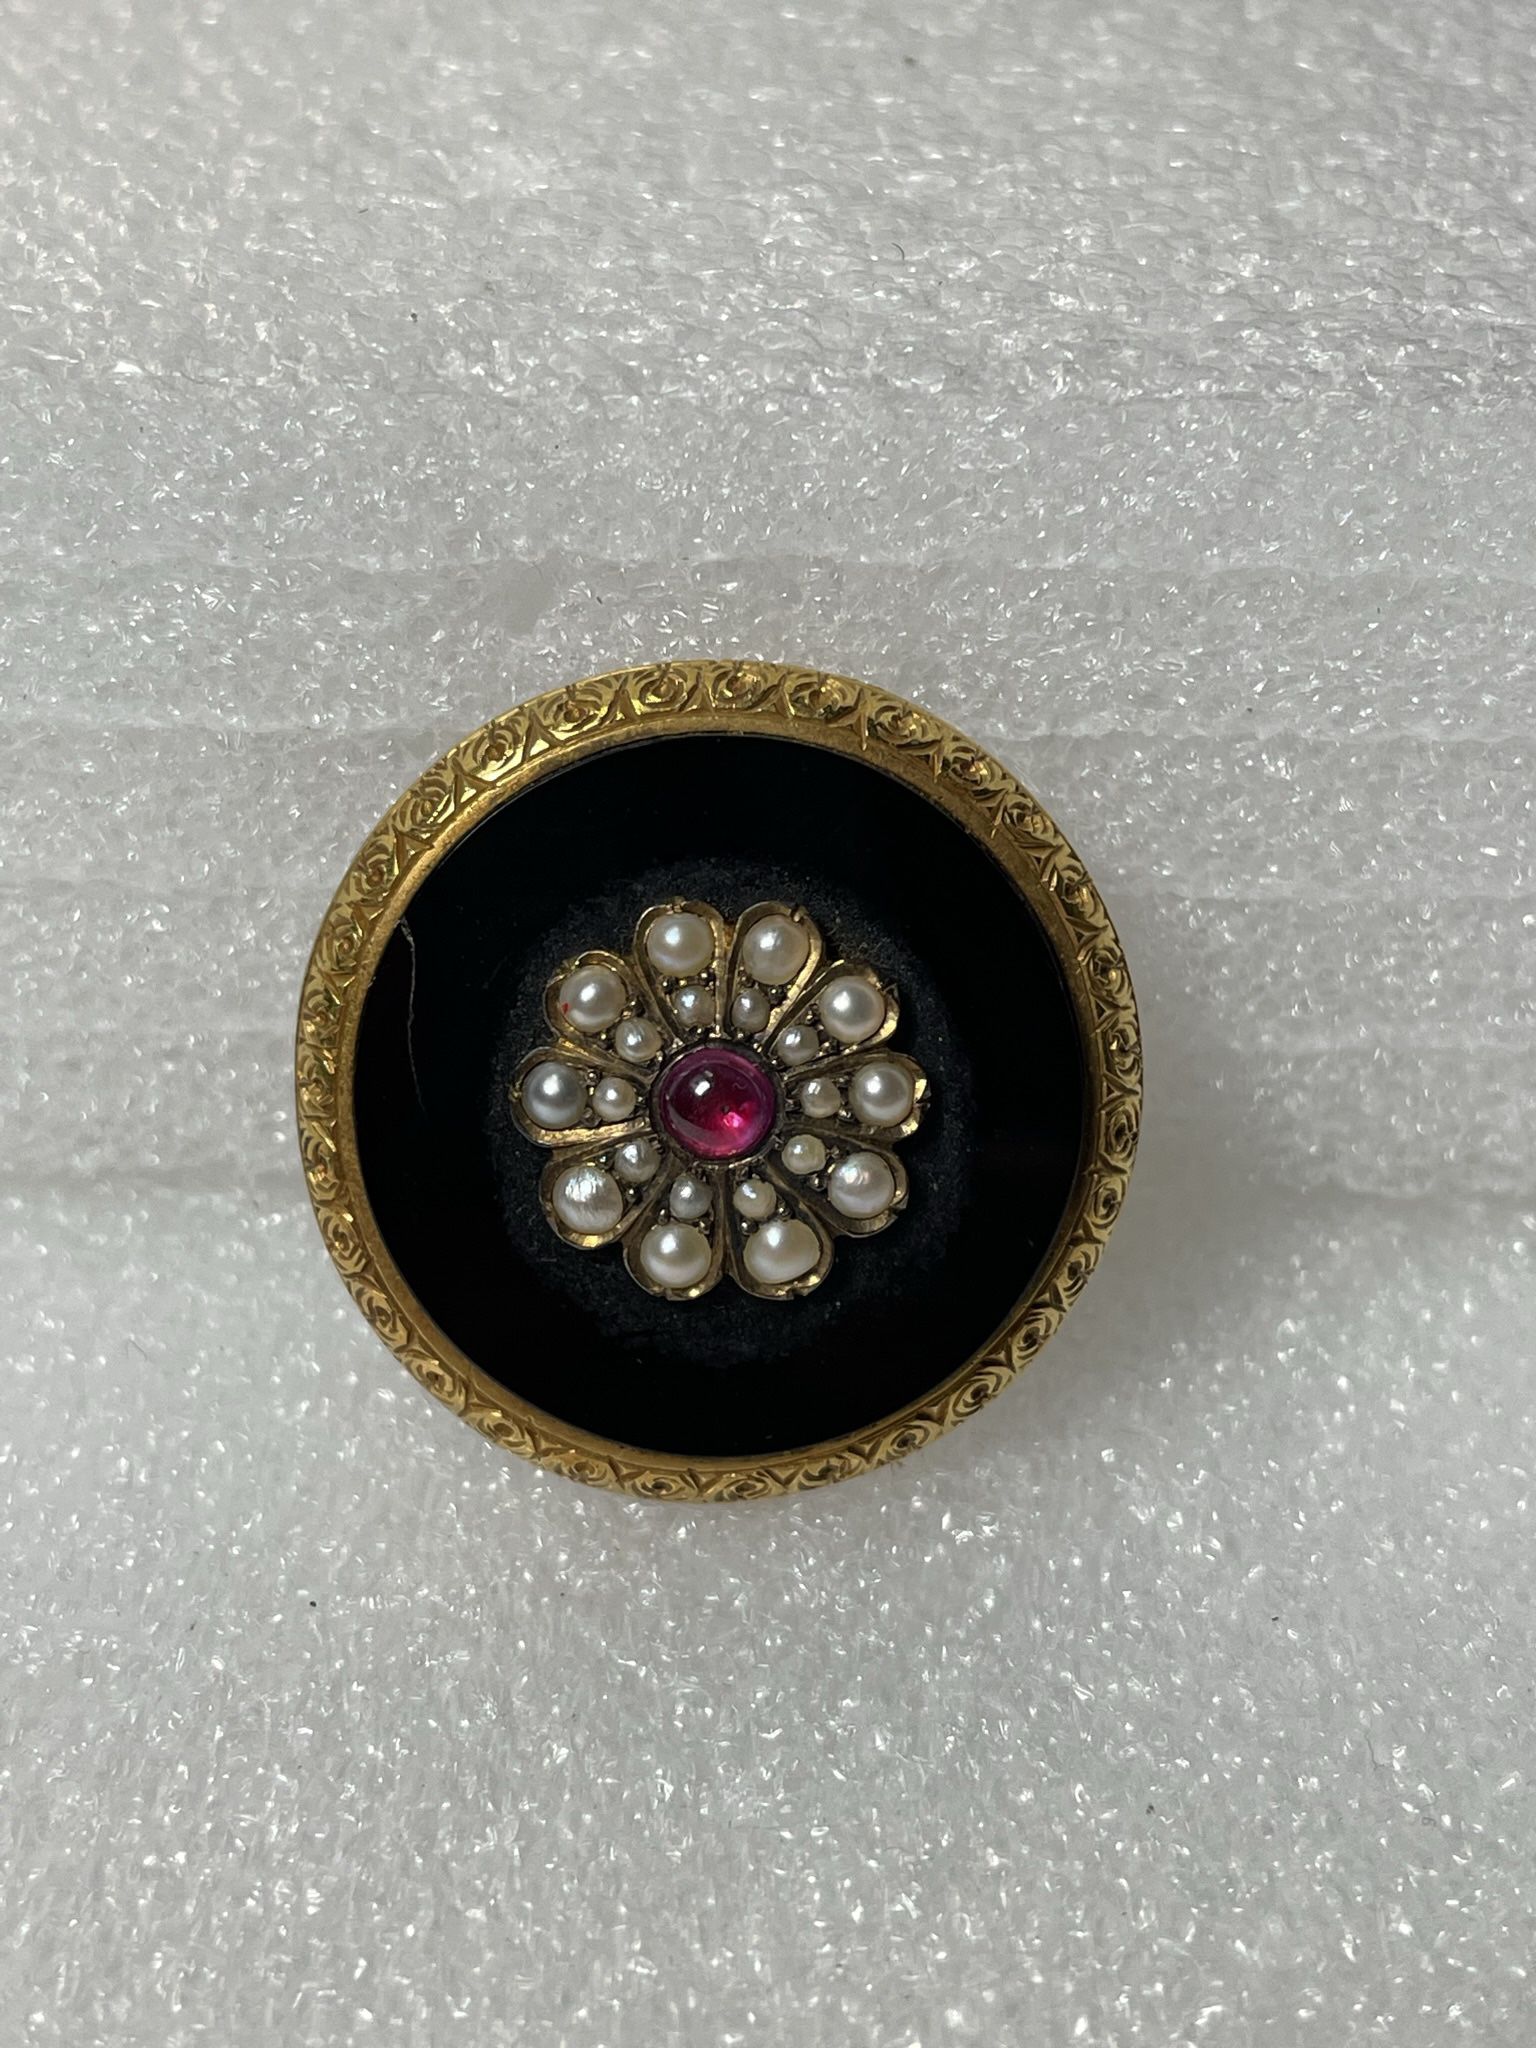 20KT Yellow Gold Seed Pearl, Ruby & Onyx Mourning Brooch / Pin